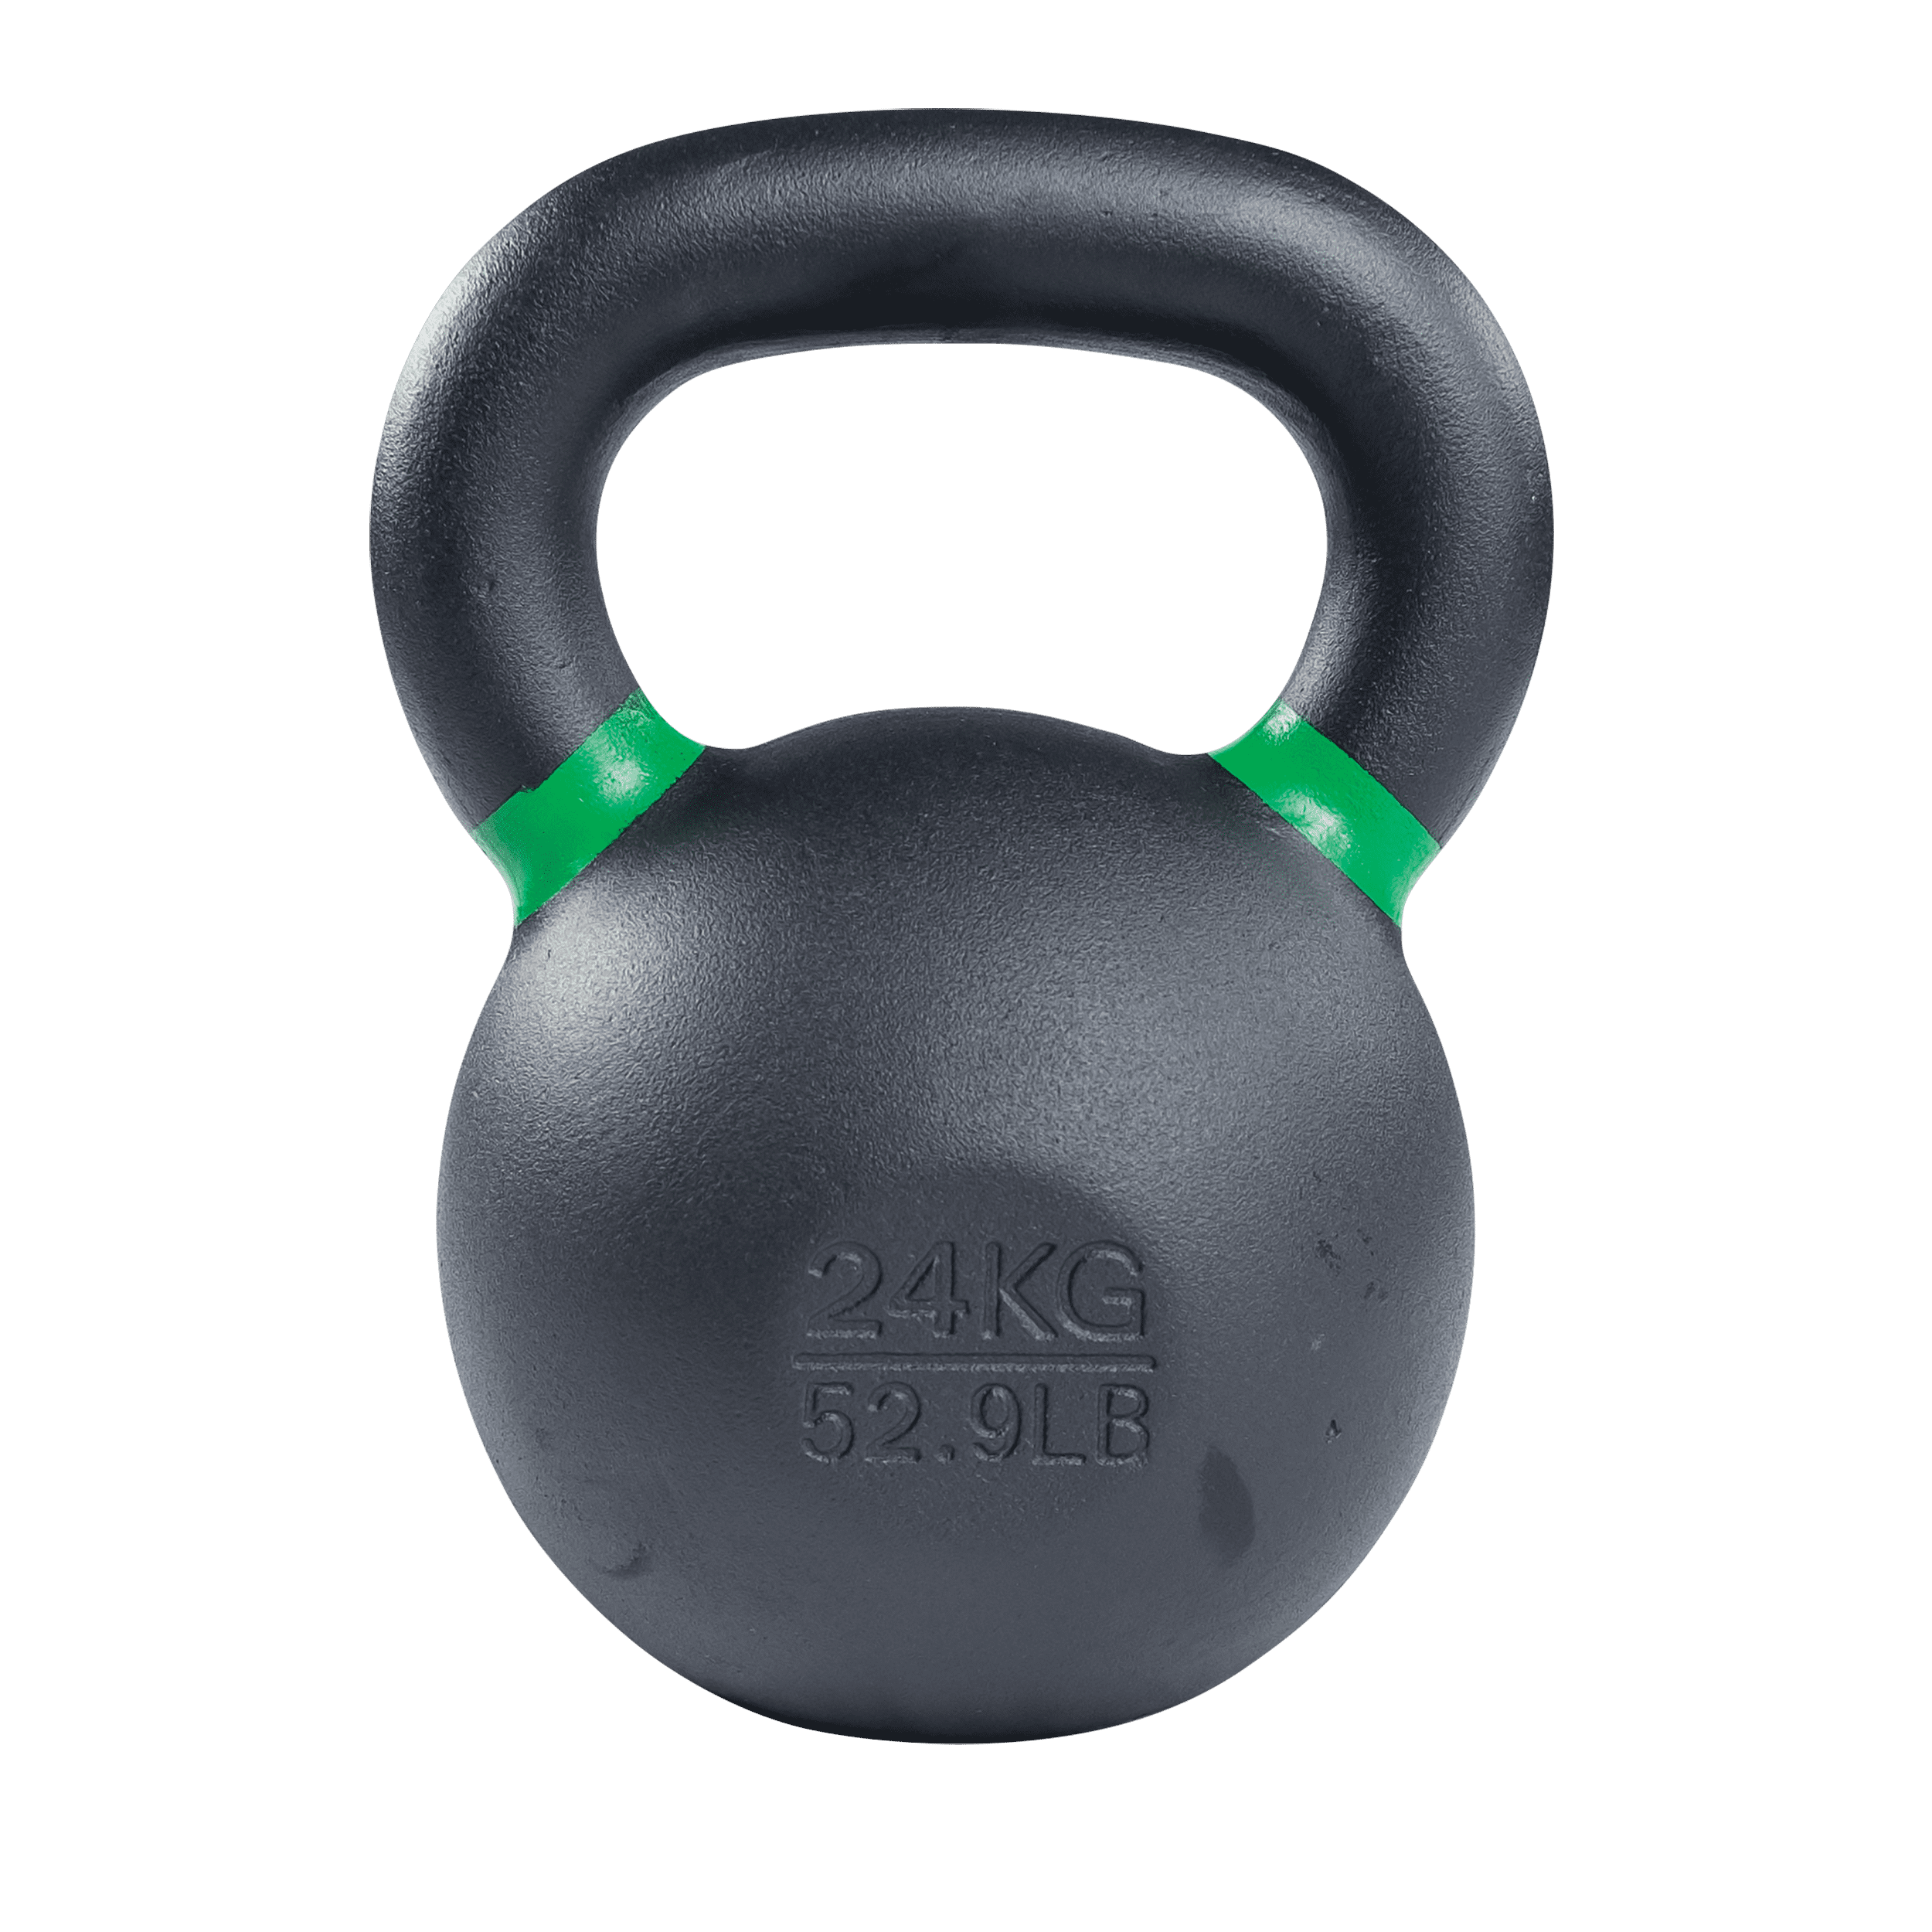  Kettlebell Ladies Fitness Kettlebell, Home Gym Core Training  Cross Training Arm Strength Training Weight, 2kg/4kg/6kg (Size : 6KG/13.22LB)  : Sports & Outdoors